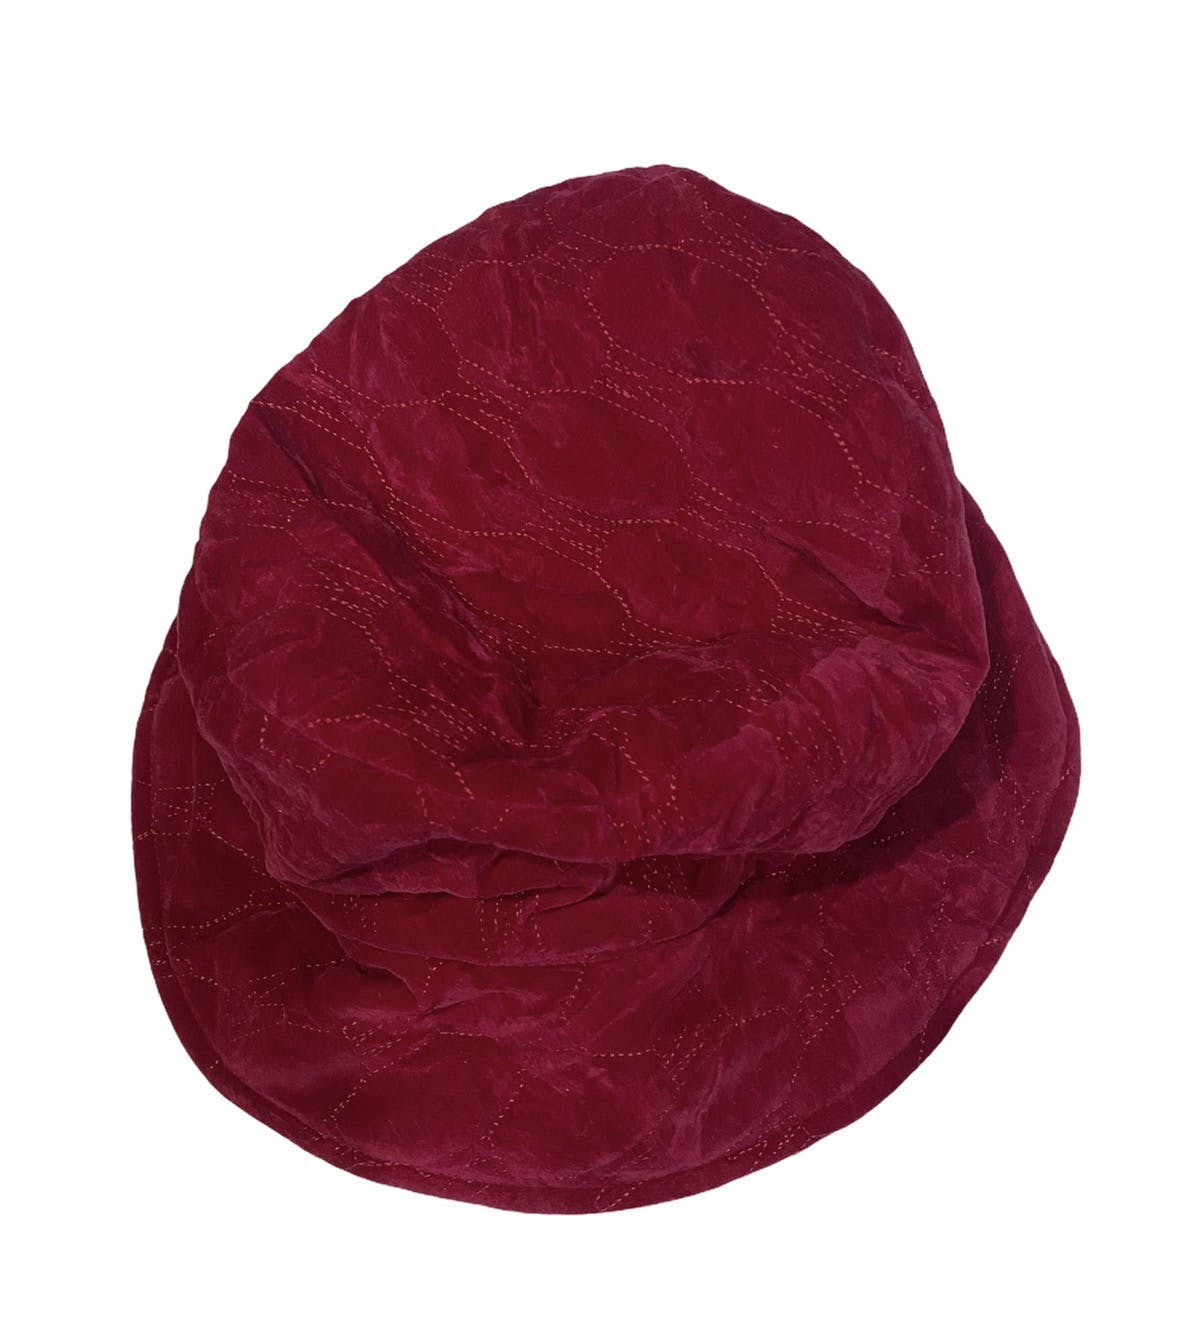 VINTAGE MOSCHINO CHEAP AND CHIC VELVET BUCKET HAT / HAT - 2